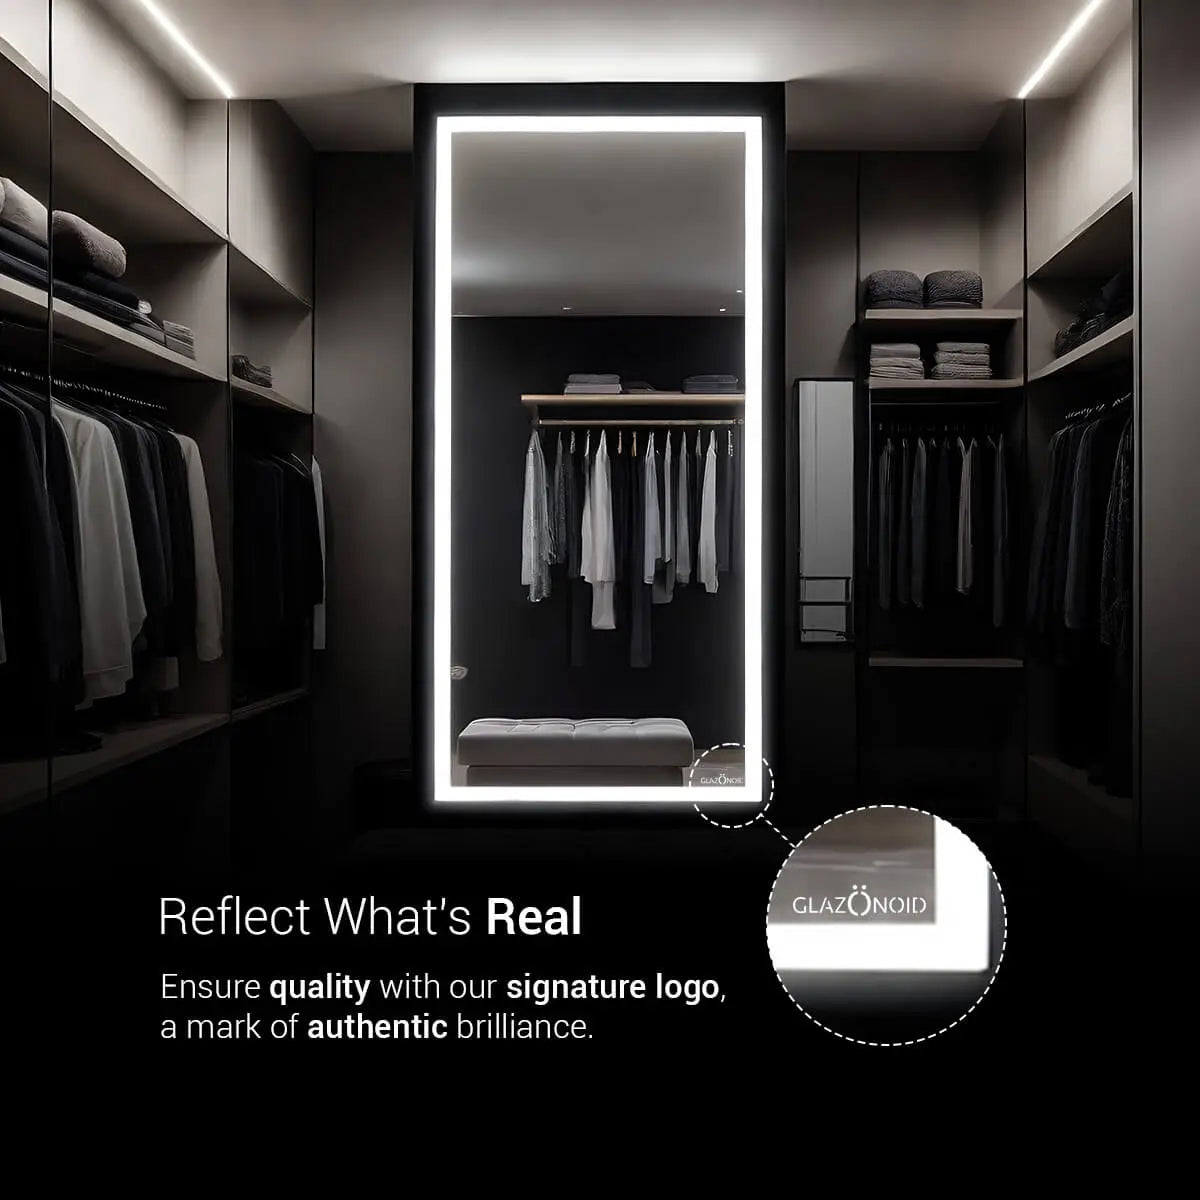 Glazonoid Full-length mirror in a brightly lit walk-in closet. This modern LED mirror is frameless and provides bright  light, perfect for checking your outfit before you go out.